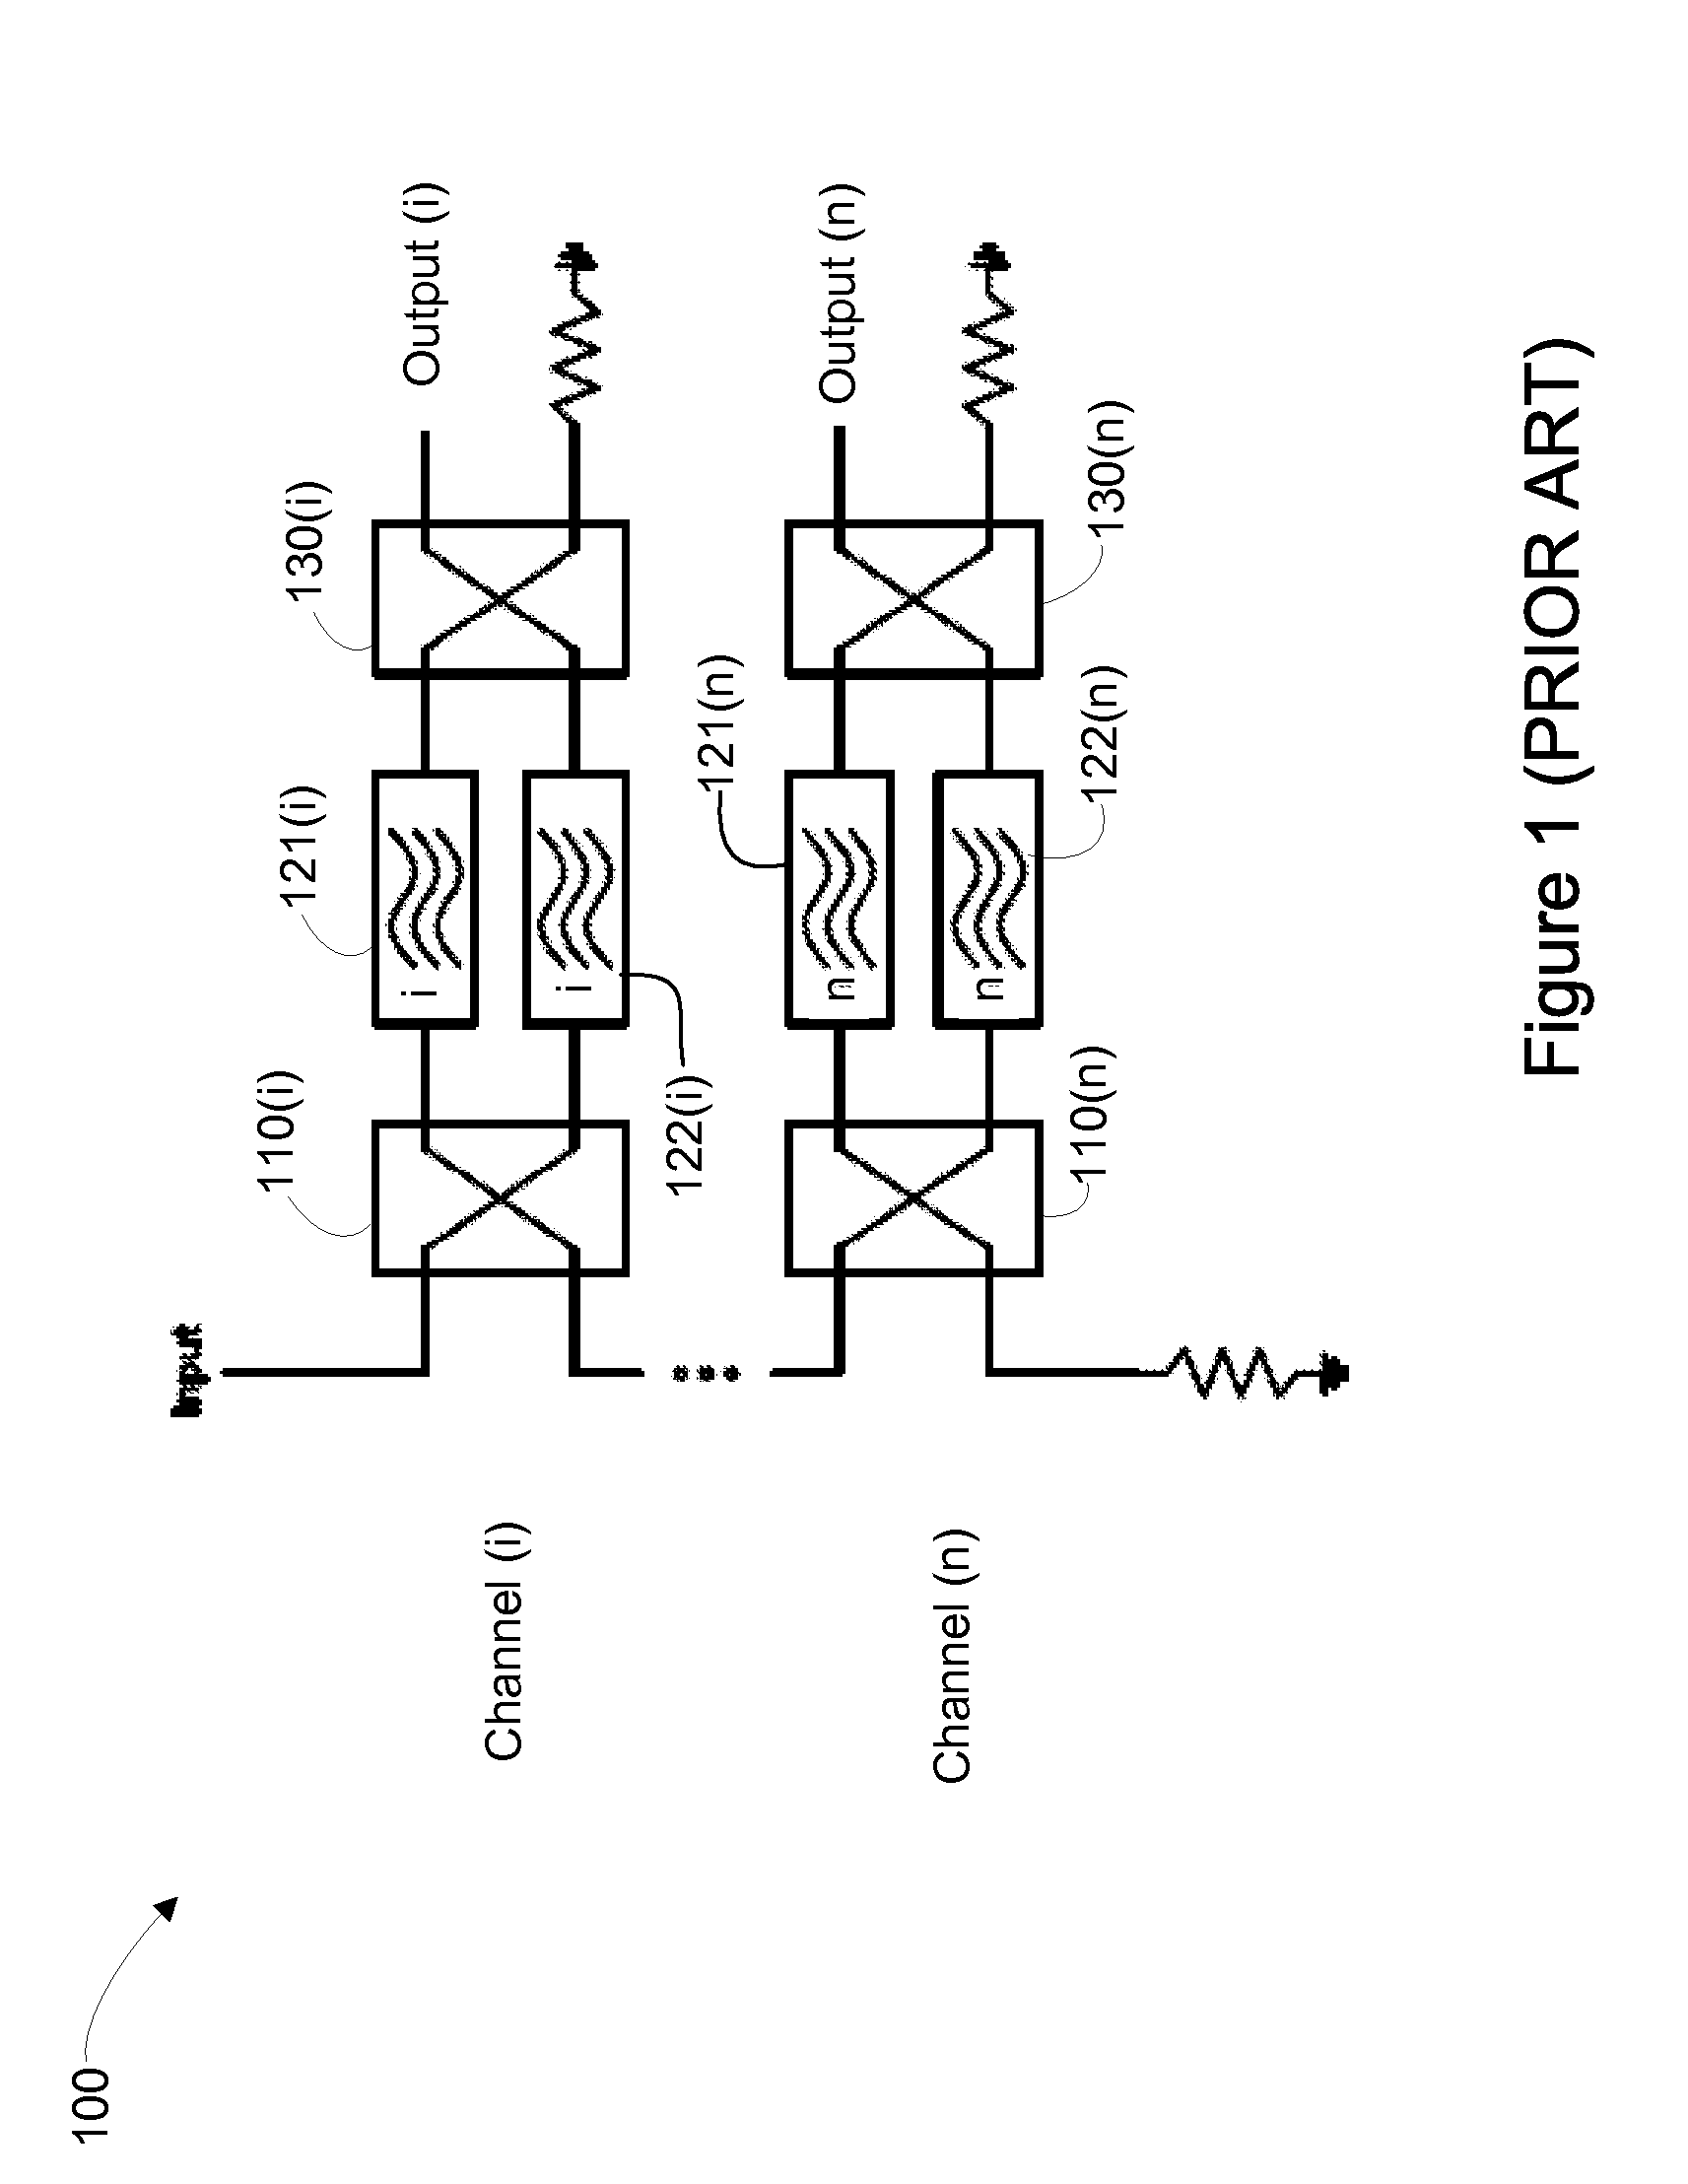 Compact microstrip hybrid coupled input multiplexer